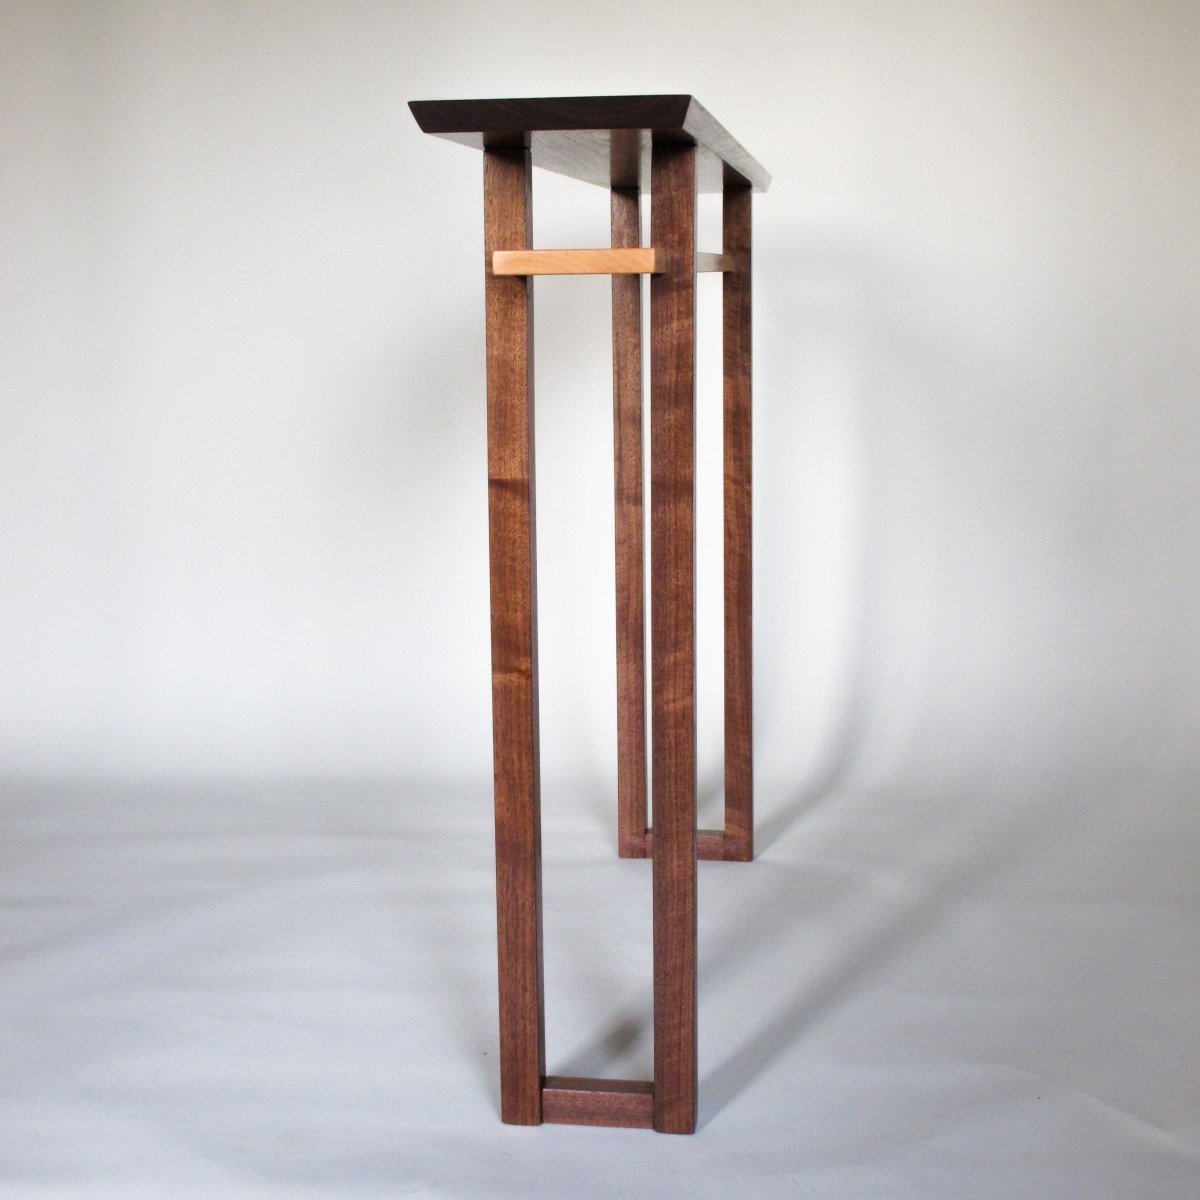 this narrow console table is an 8 inch deep console table with shelf by Mokuzai Furniture